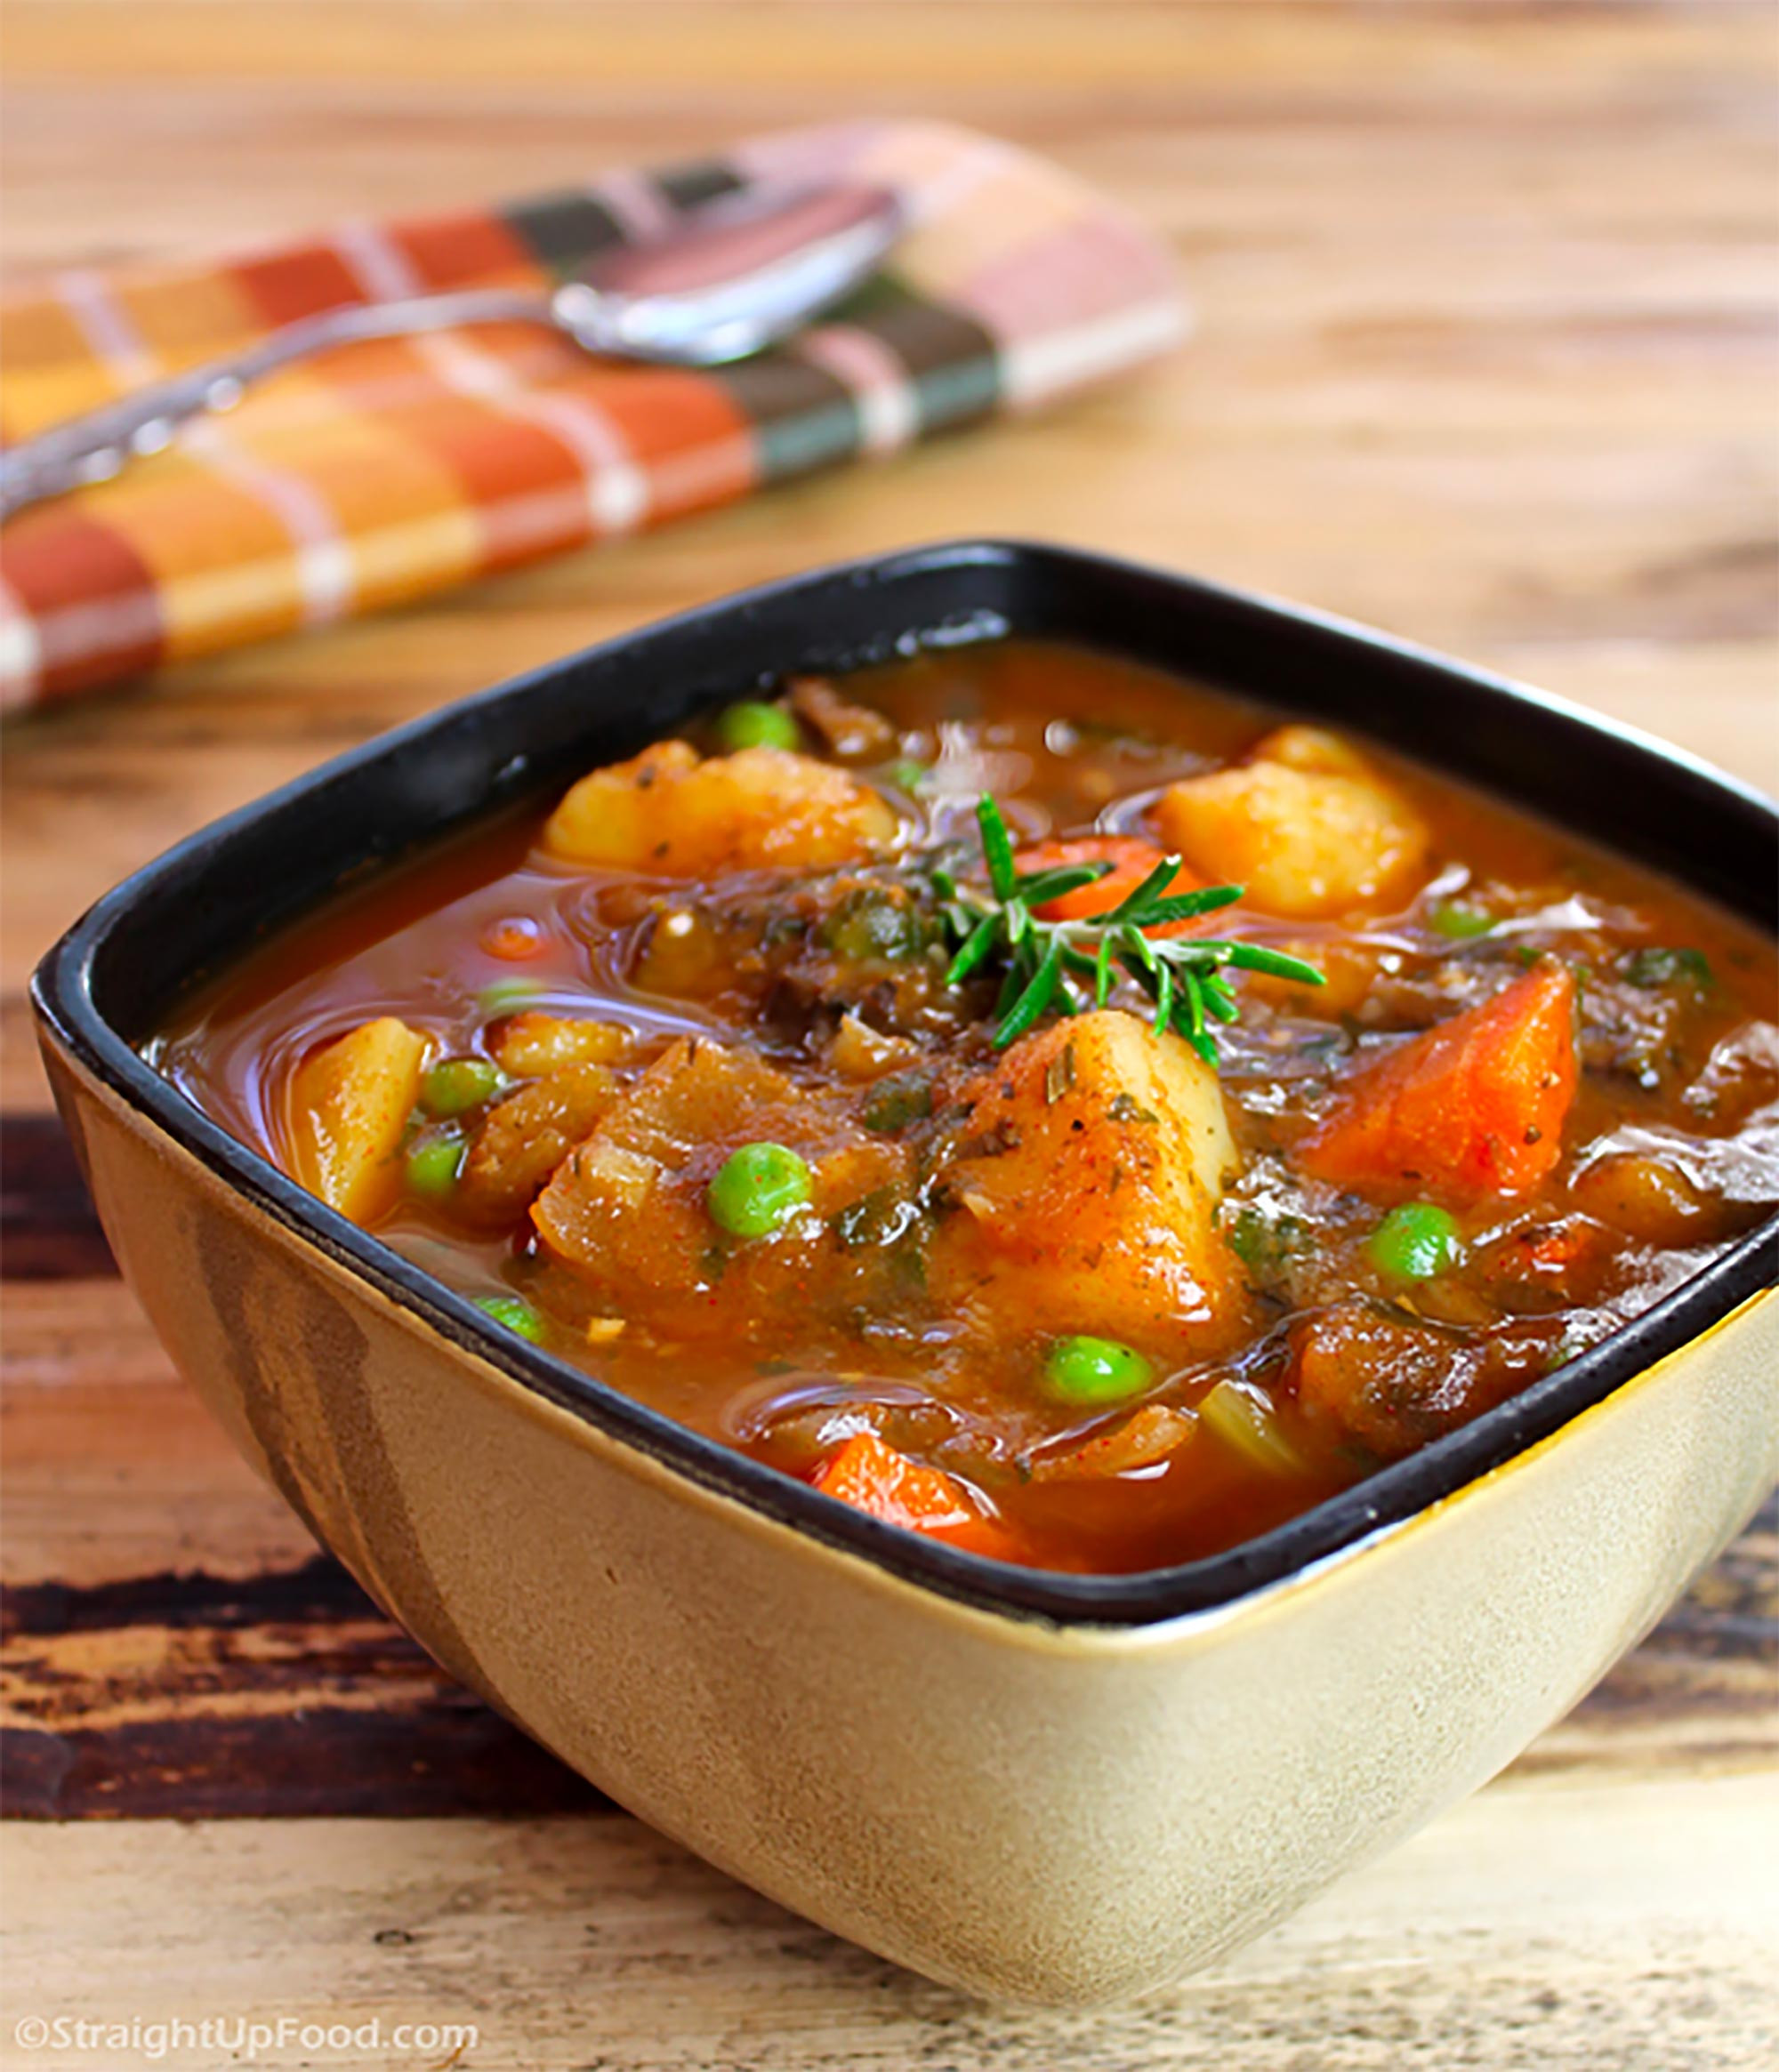 Winter Stew Recipes
 Healthy Vegan Winter Soup Recipes to Keep You Warm This Winter